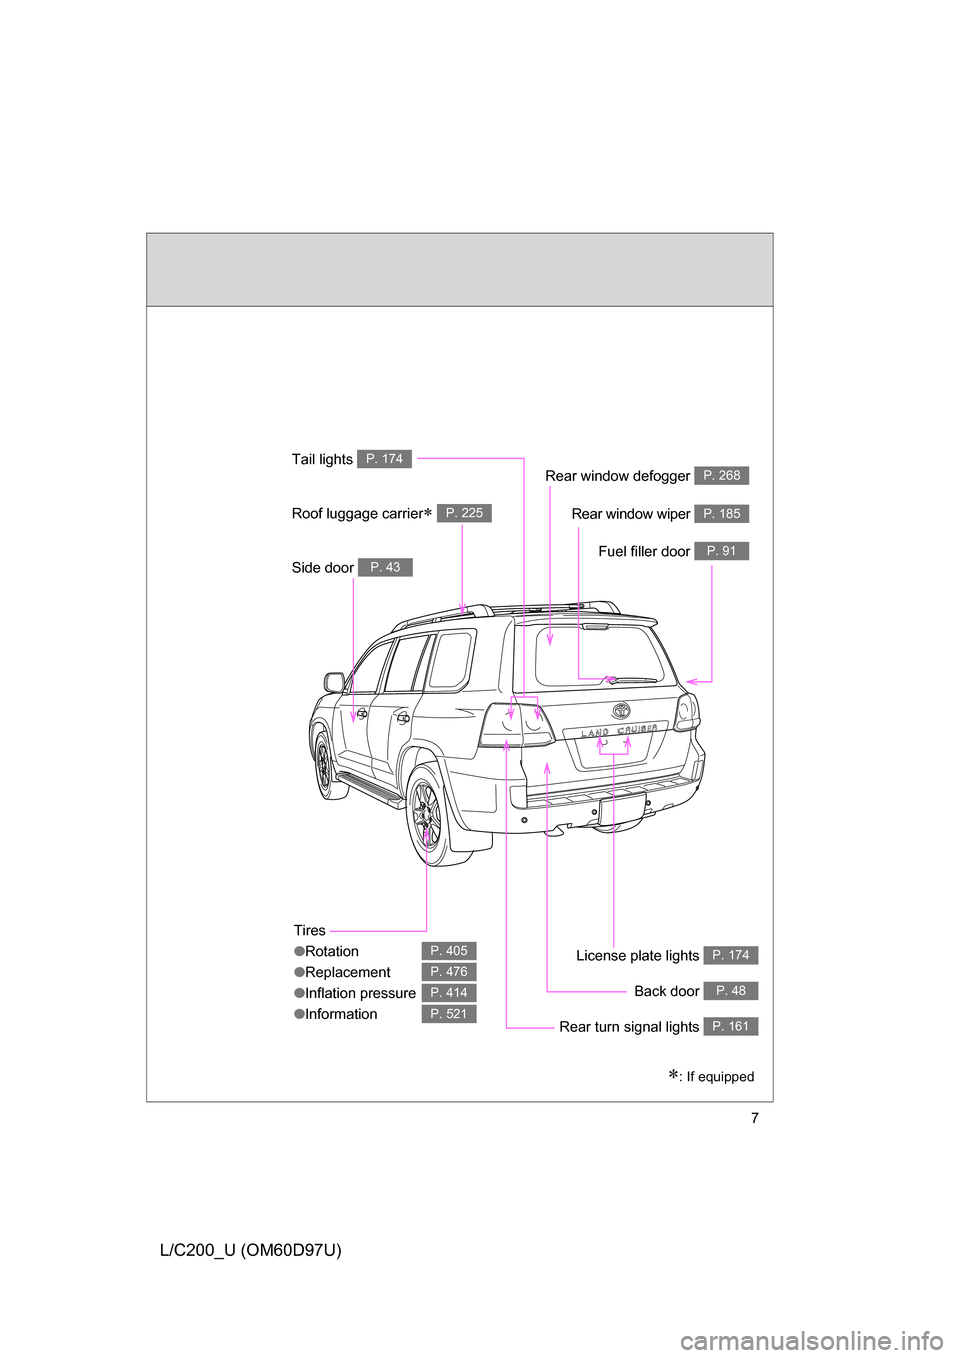 TOYOTA LAND CRUISER 2009 J200 Owners Manual 7
L/C200_U (OM60D97U)
Tires
●Rotation
● Replacement
● Inflation pressure
● Information
P. 405
P. 476
P. 414
P. 521
Rear window defogger P. 268
Rear window wiper P. 185
Tail lights P. 174
Side 